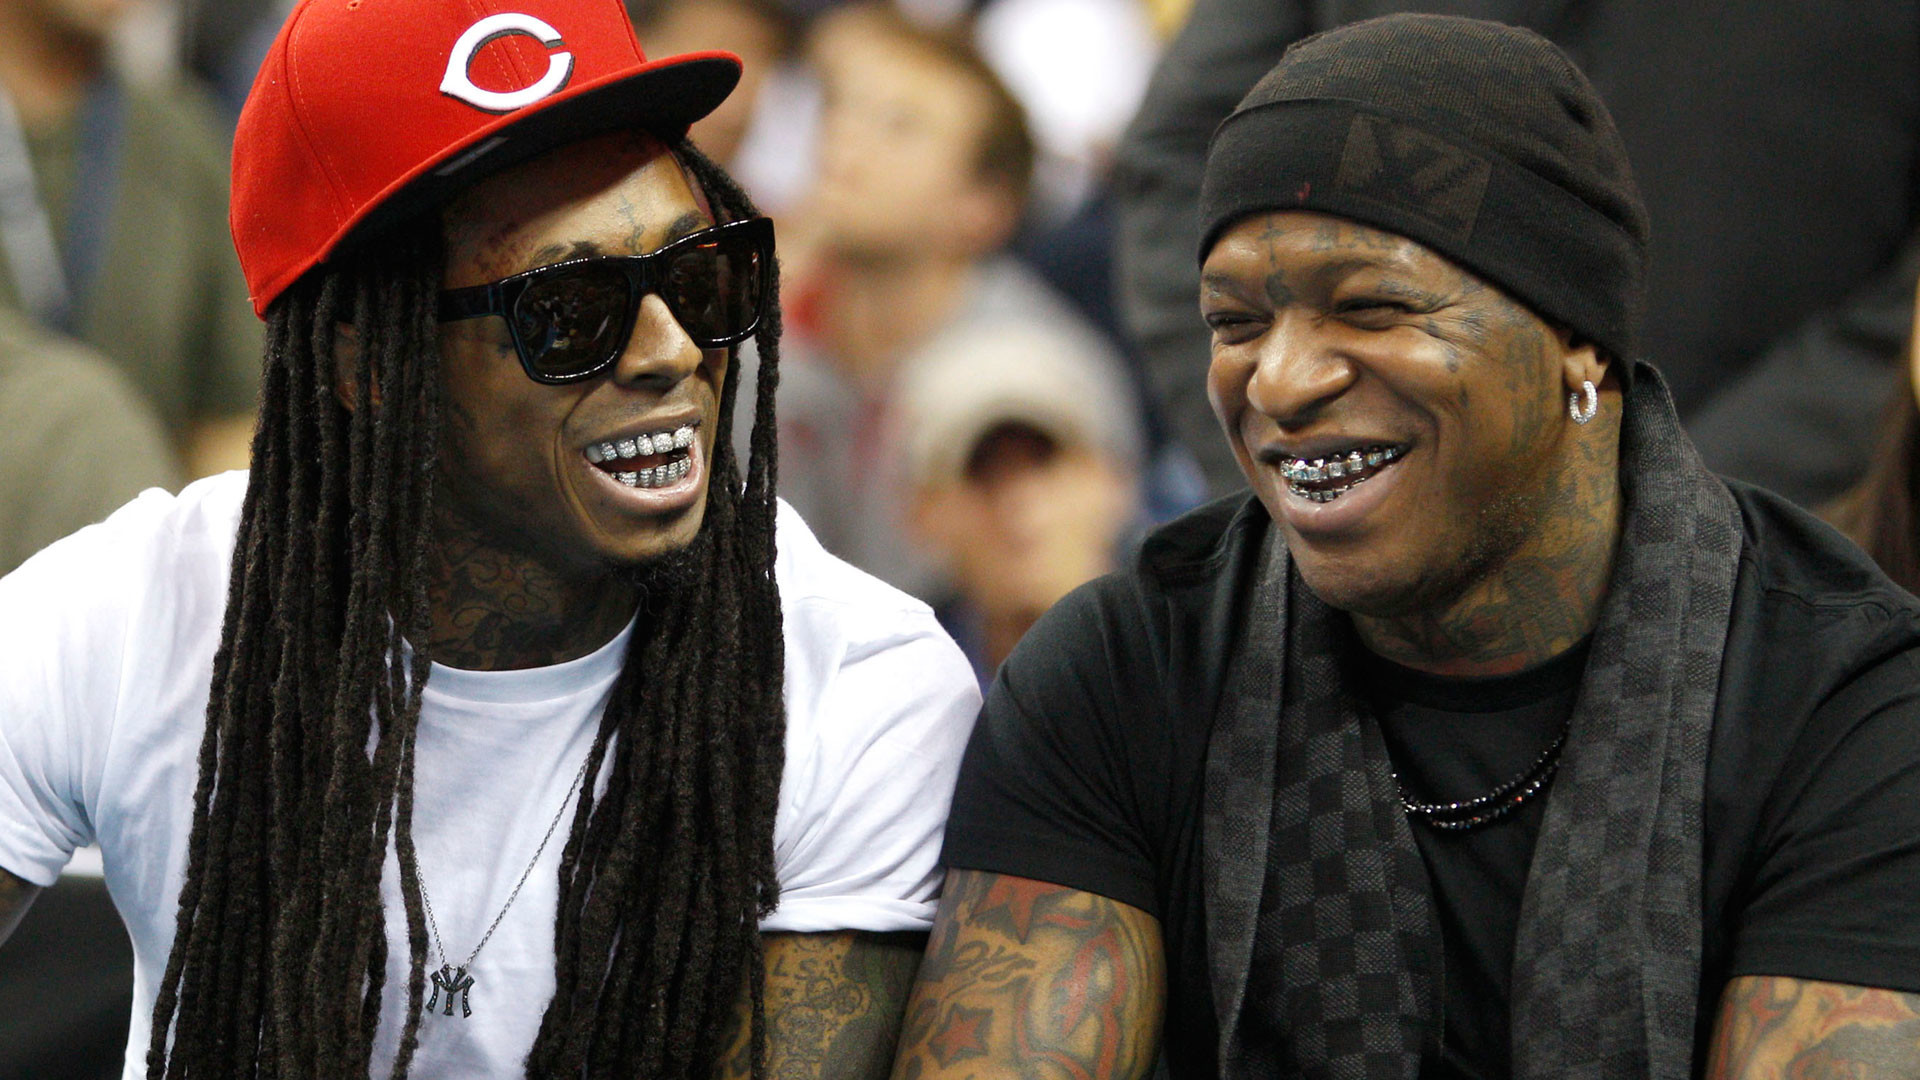 1920x1080 The beef is officially over between Lil Wayne and Birdman